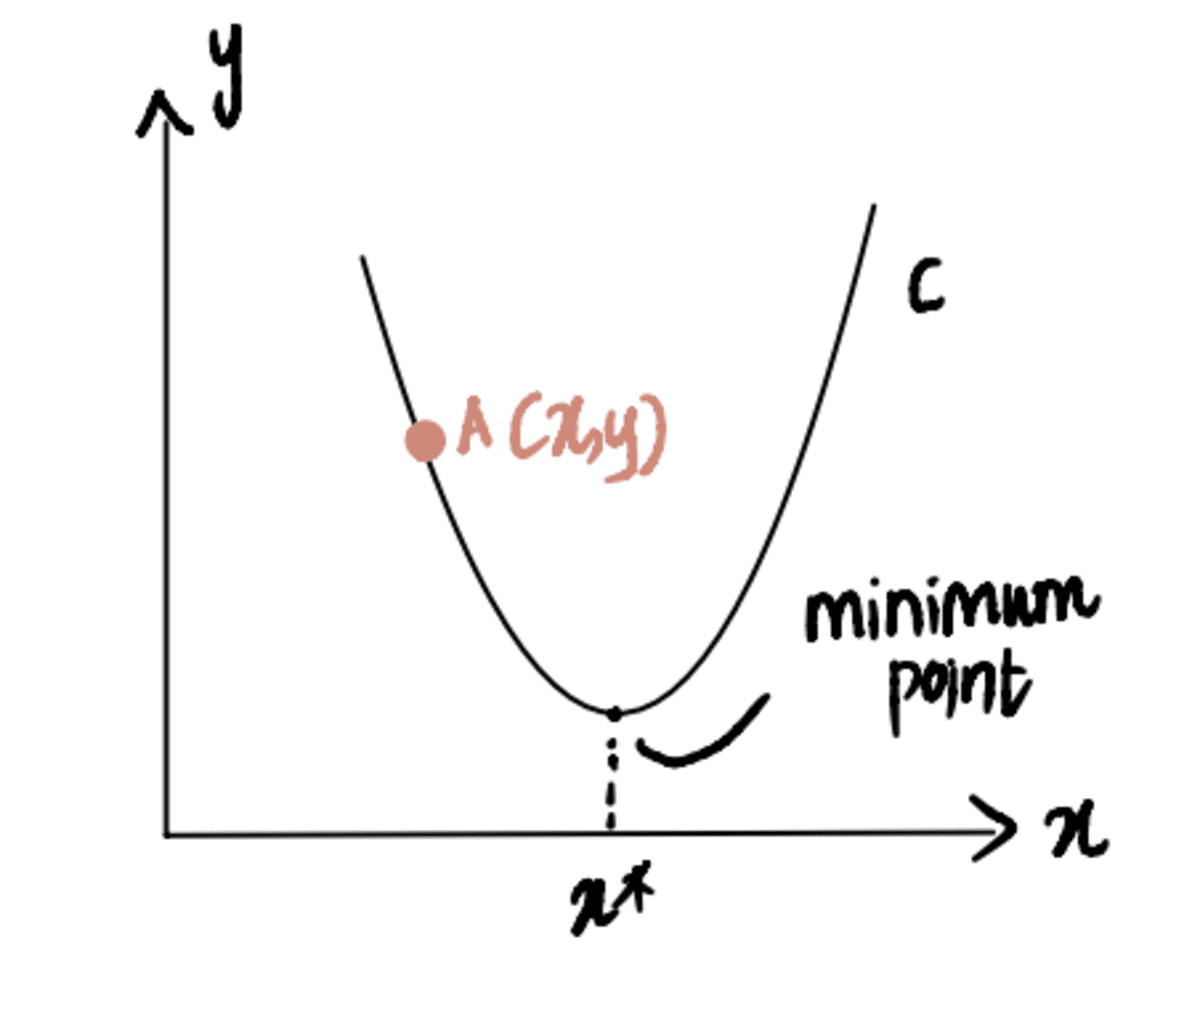 Back To Basics, Part Dos: Linear Regression, Cost Function, and Gradient Descent